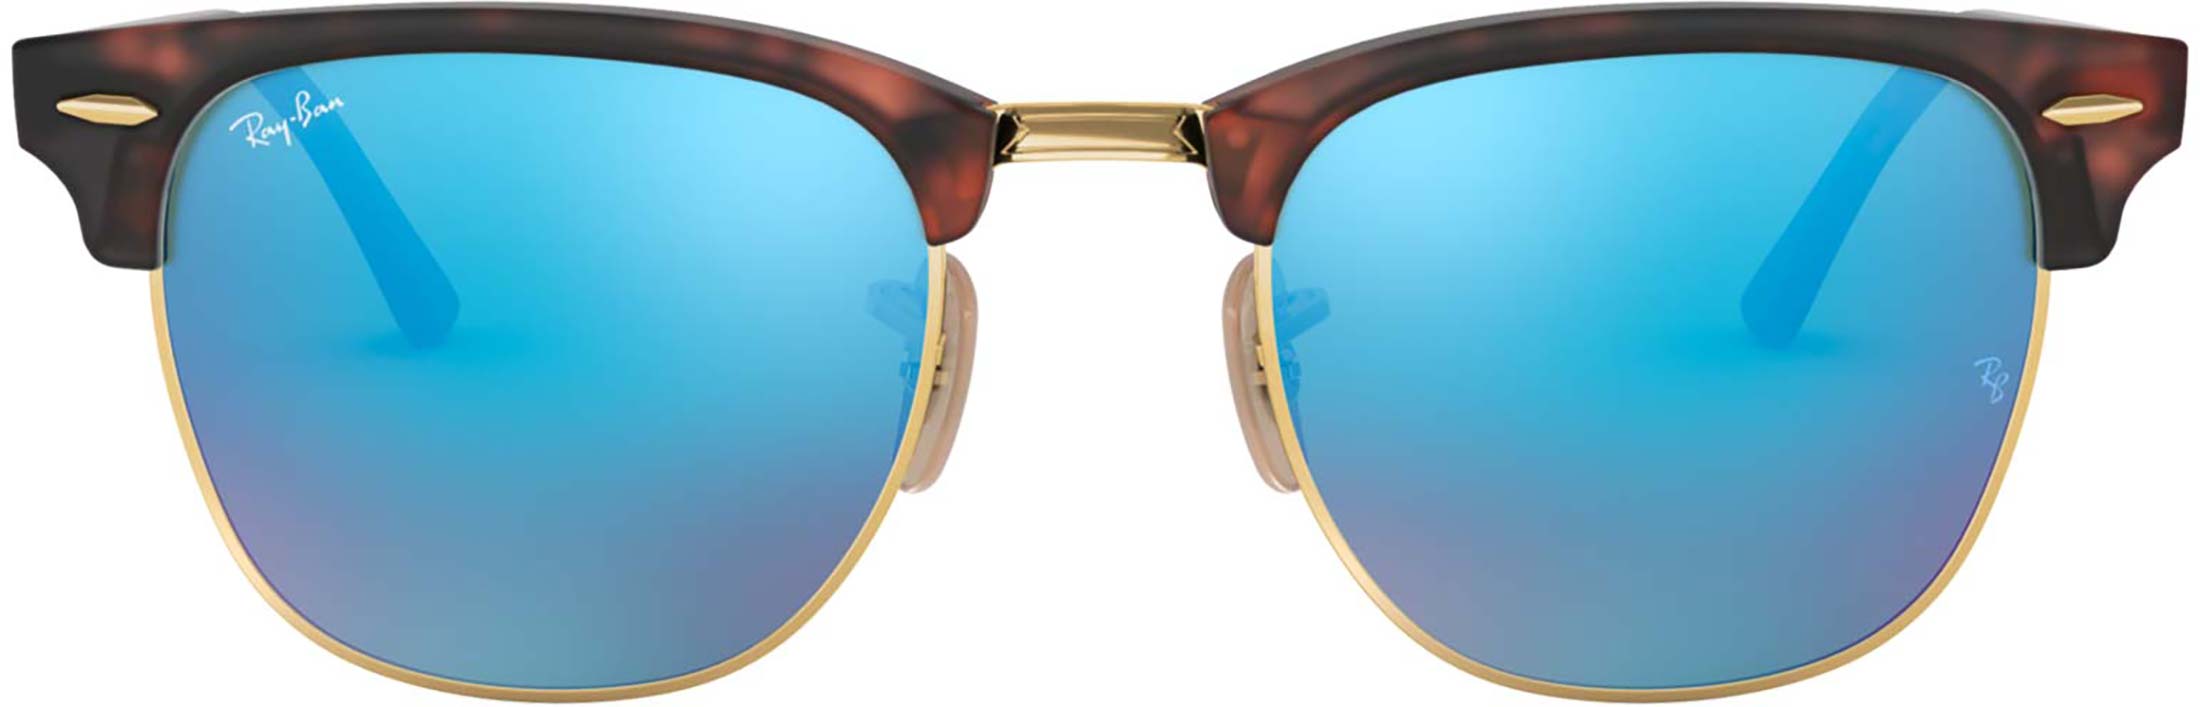 Ray-Ban Clubmaster solbriller |